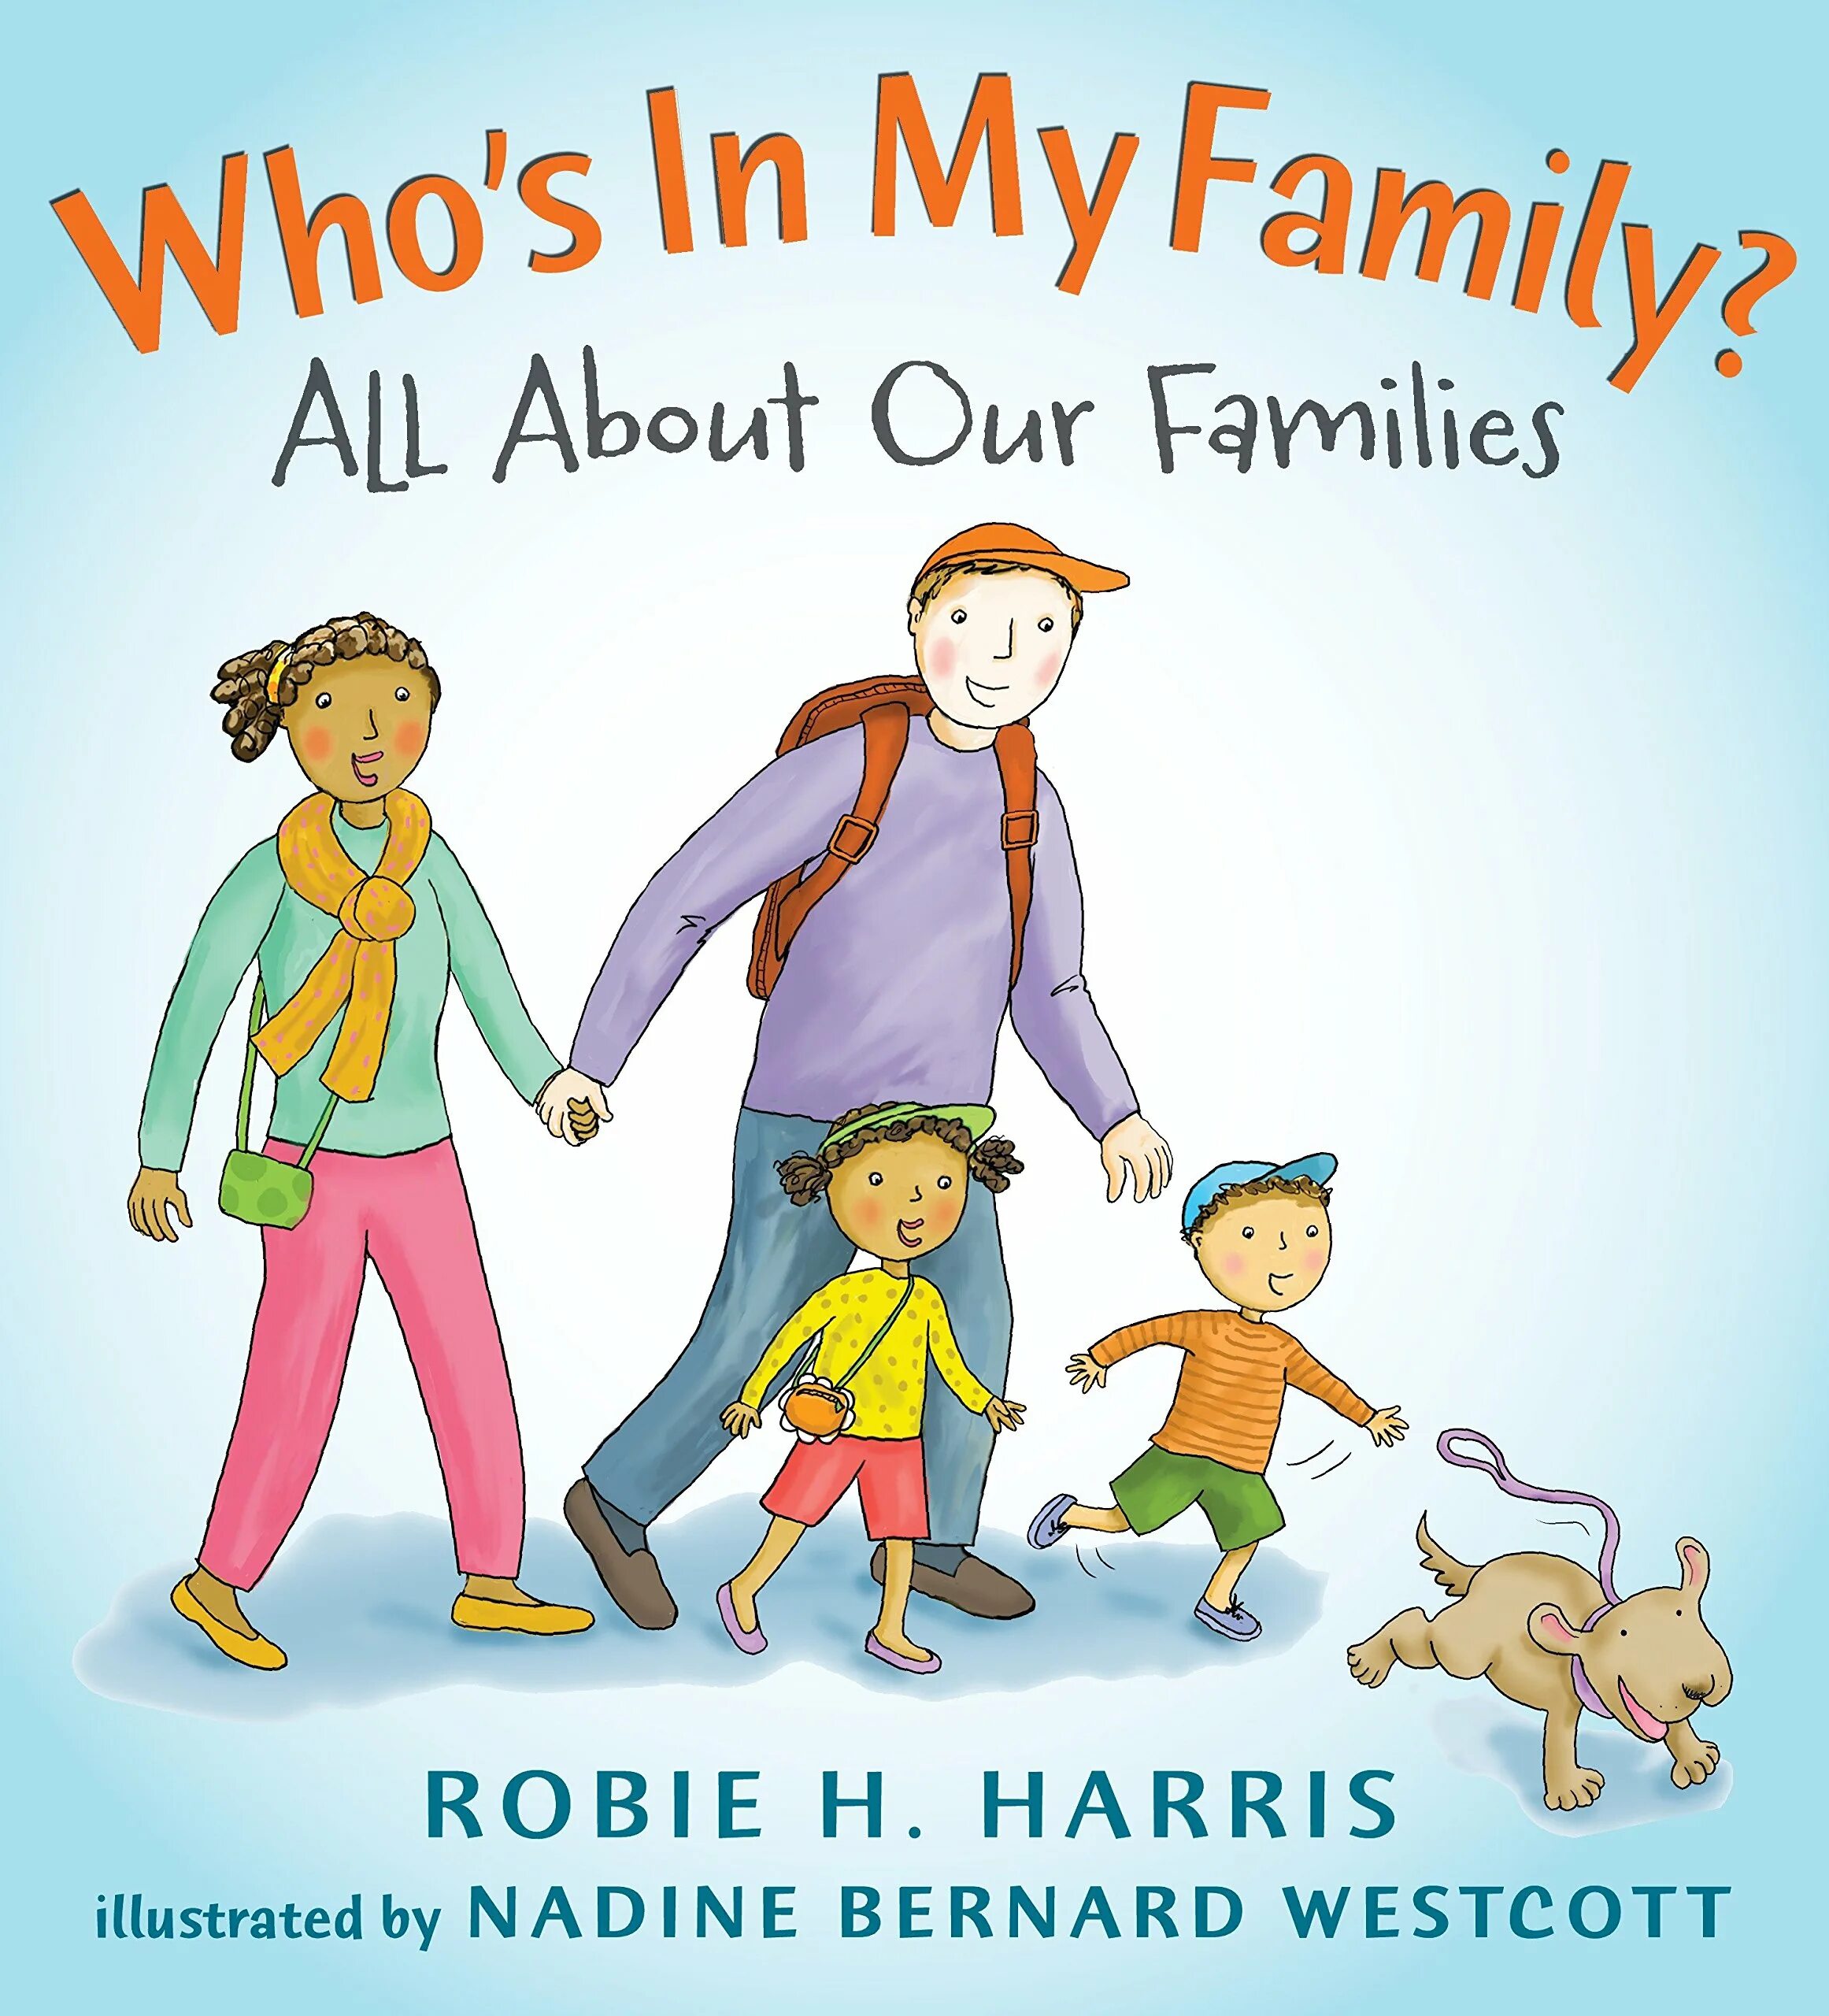 Books my family. Книга my Family. About Family. All about Family for Kids. The Family book.